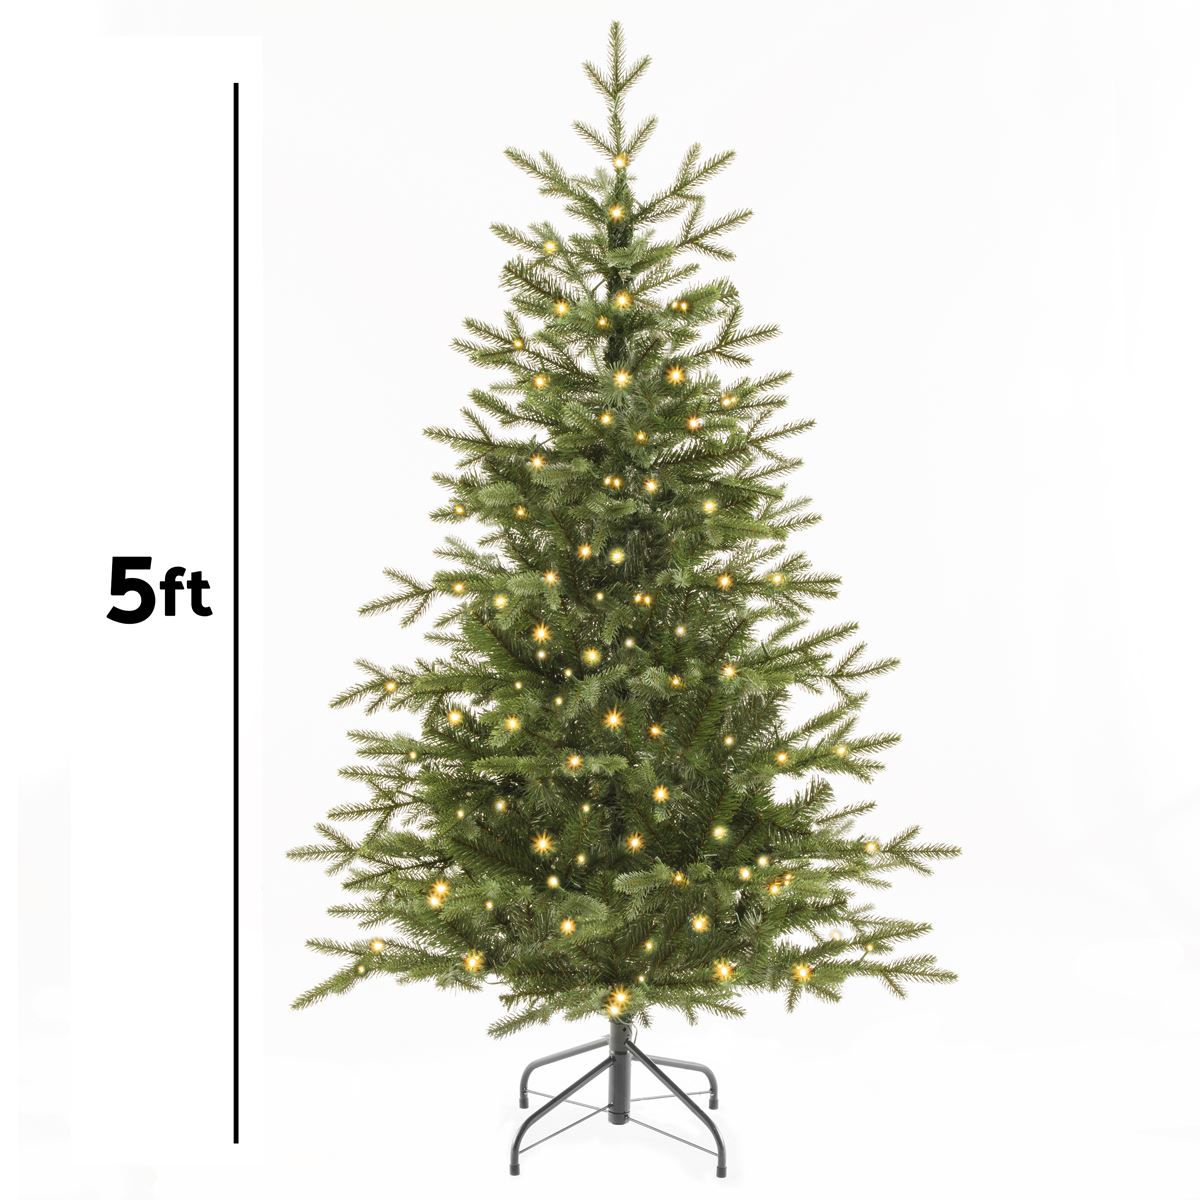 Dellonda Pre-Lit 5ft Hinged Christmas Tree with Warm White LED Lights & PE/PVC Tips